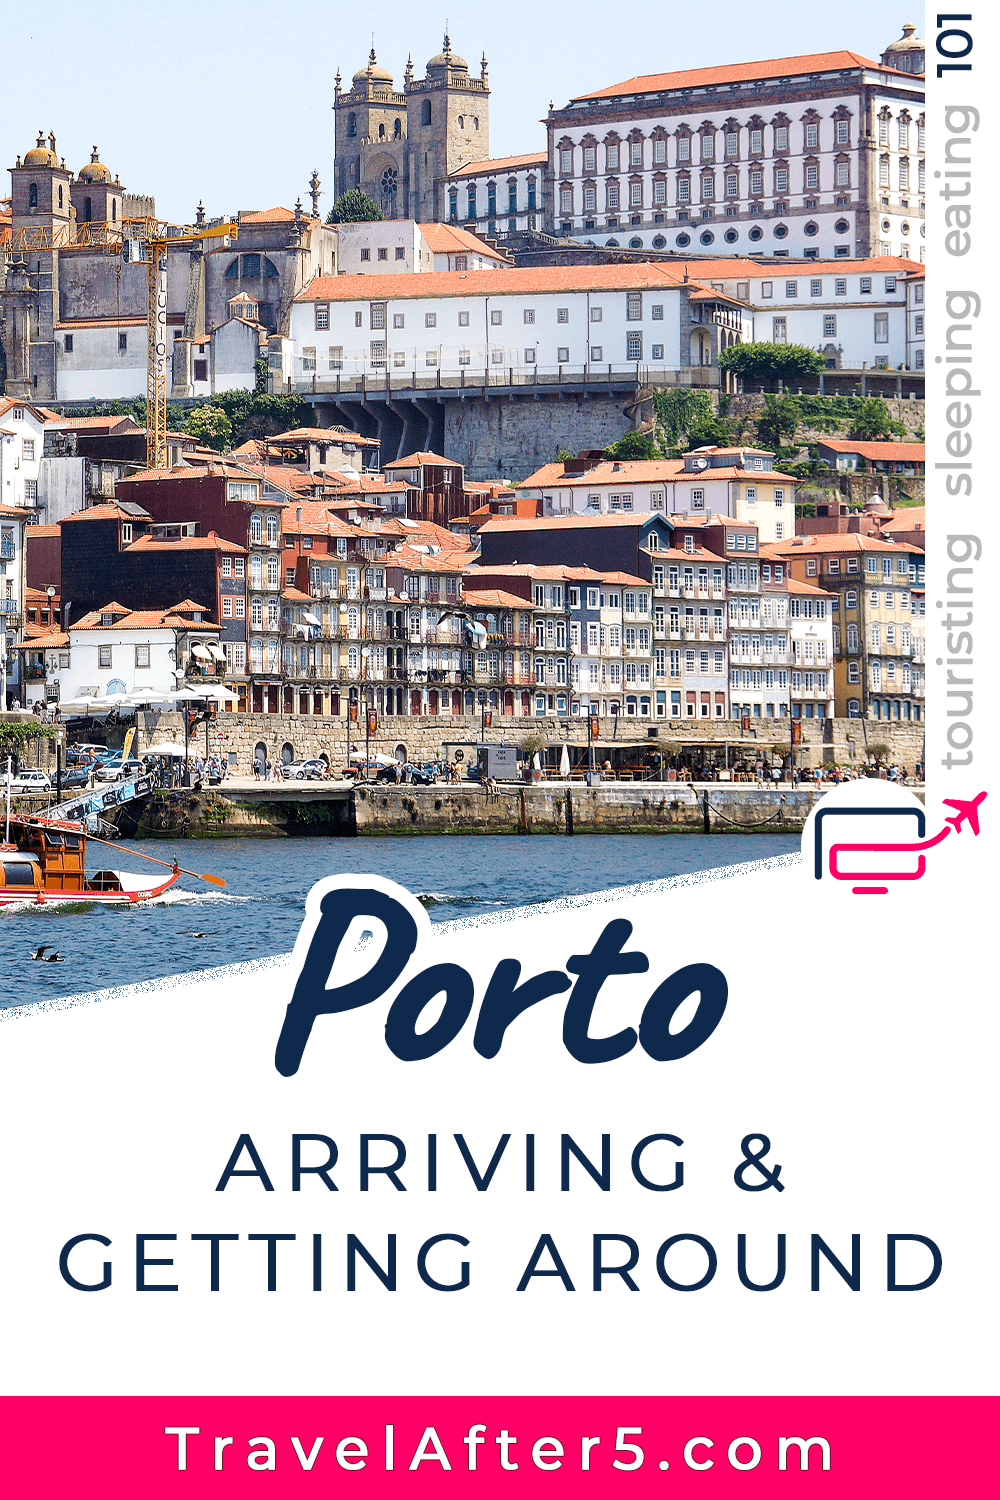 Pinterest Pin to Porto 101, Arriving & Getting Around, by Travel After 5